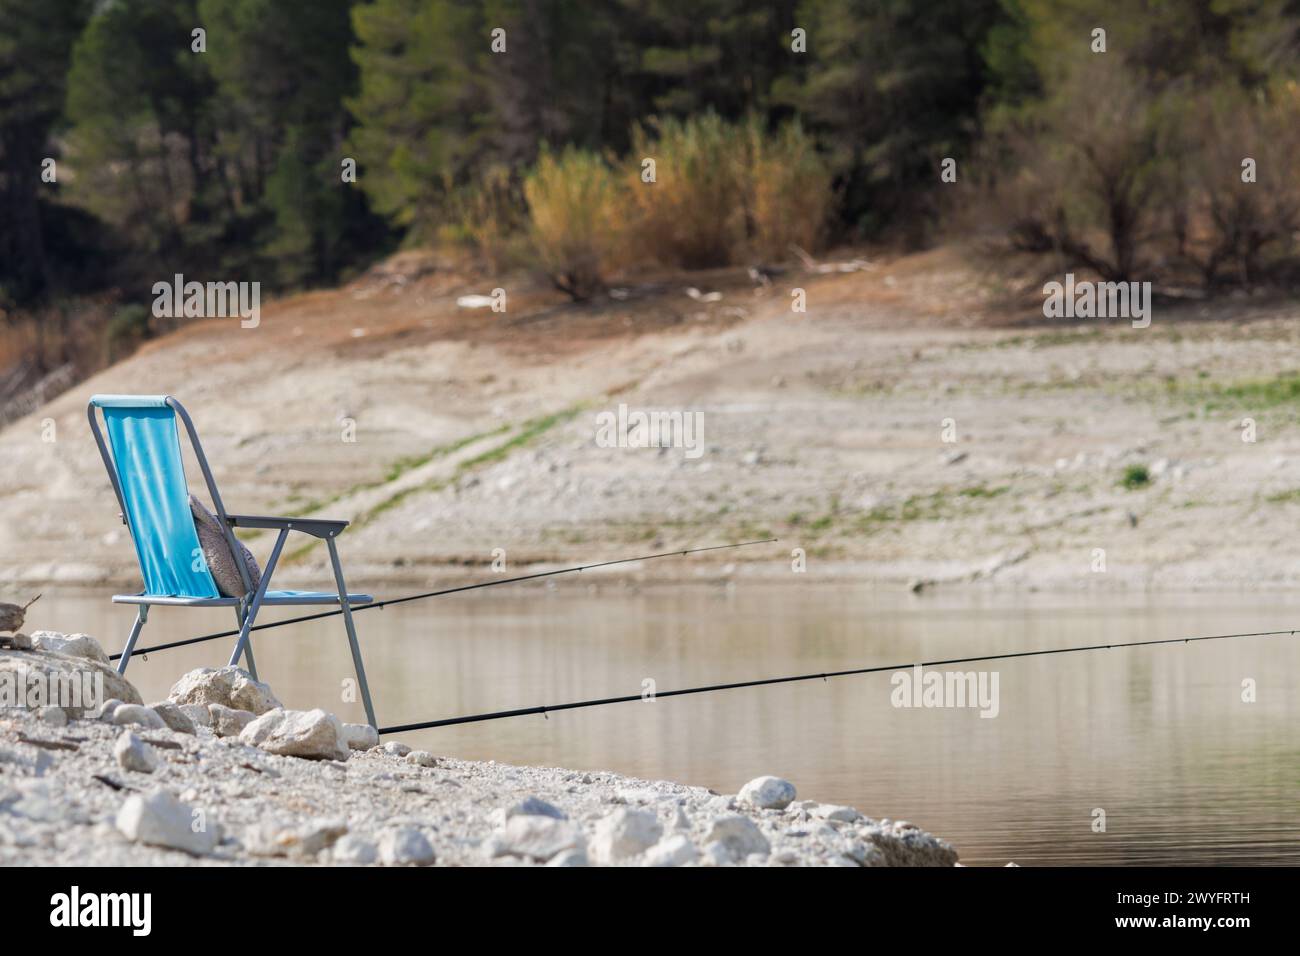 Fishing rods and chair prepared for a long day of fishing in the Beniarres reservoir, Spain Stock Photo